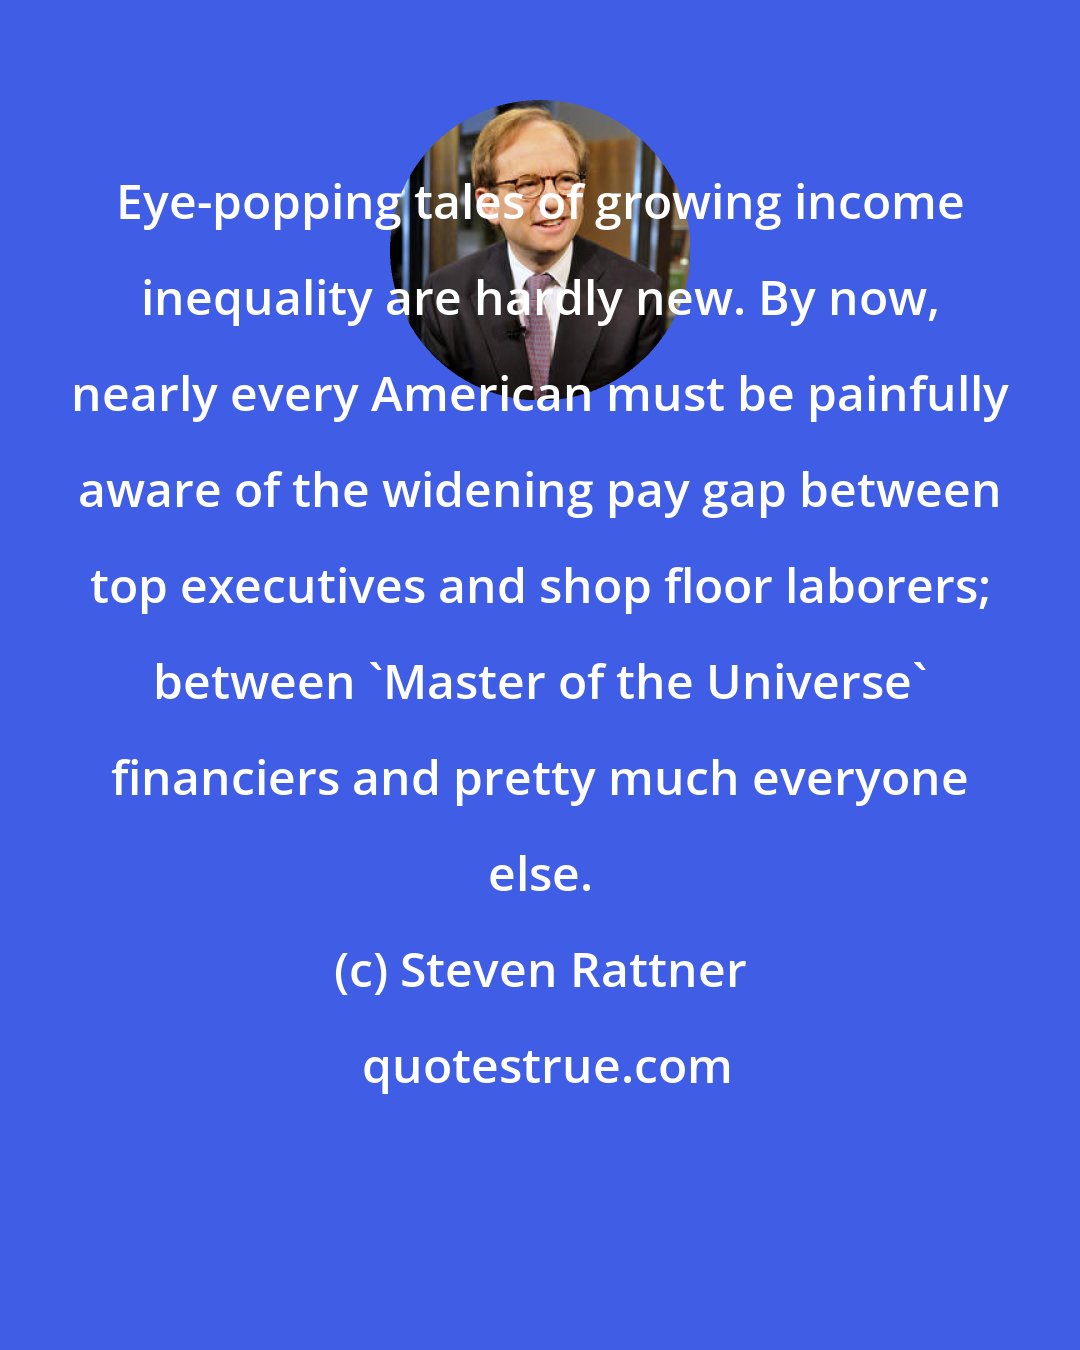 Steven Rattner: Eye-popping tales of growing income inequality are hardly new. By now, nearly every American must be painfully aware of the widening pay gap between top executives and shop floor laborers; between 'Master of the Universe' financiers and pretty much everyone else.